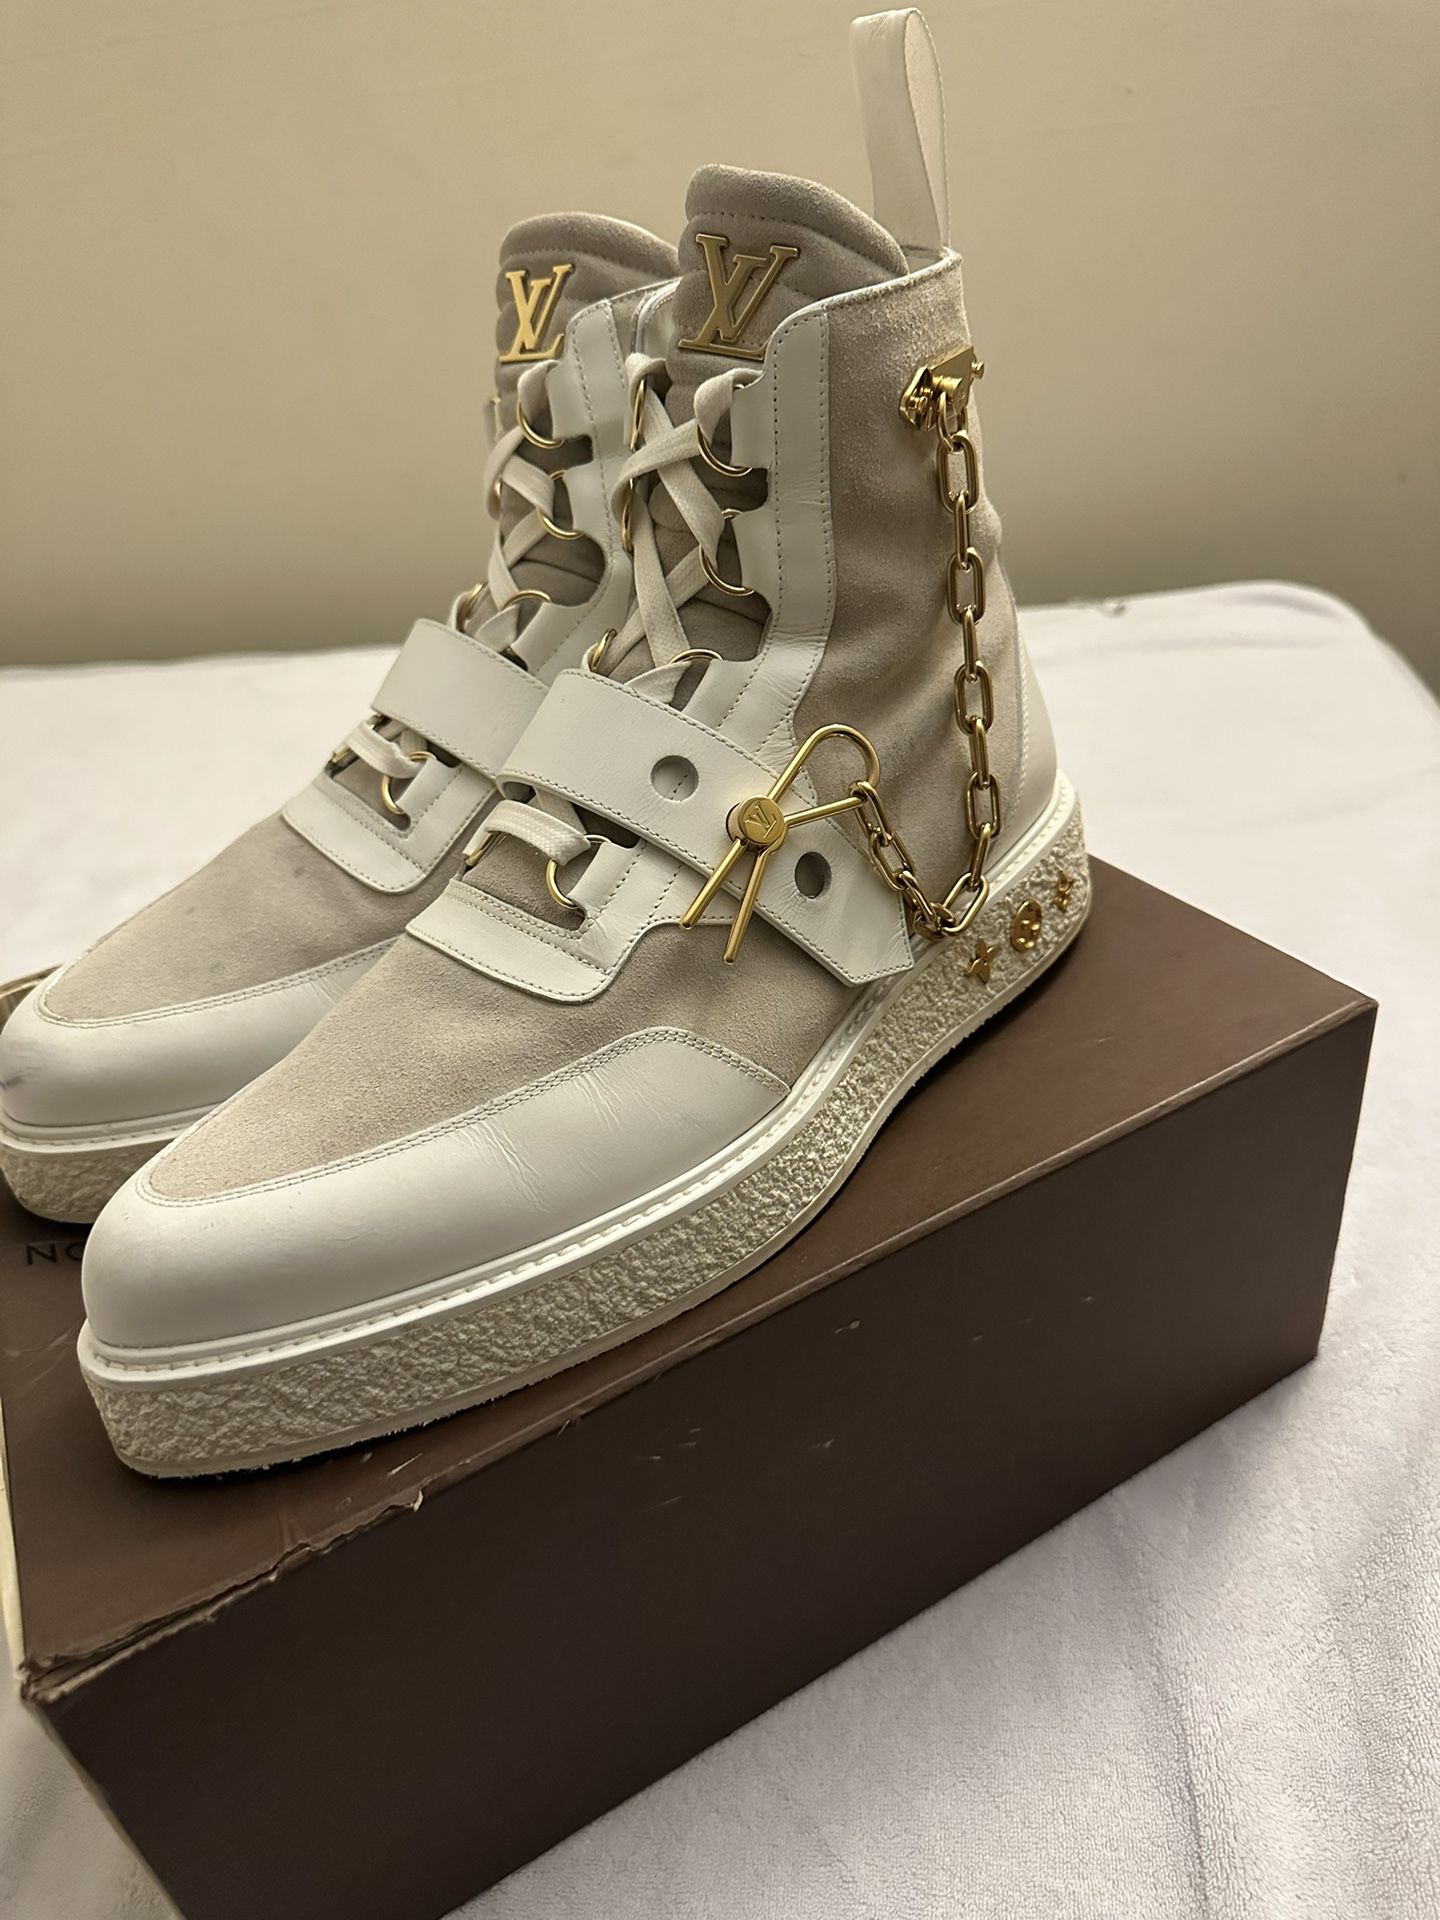 LOUIS VUITTON Virgil Abloh Creeper Ankle Boot White for Sale in